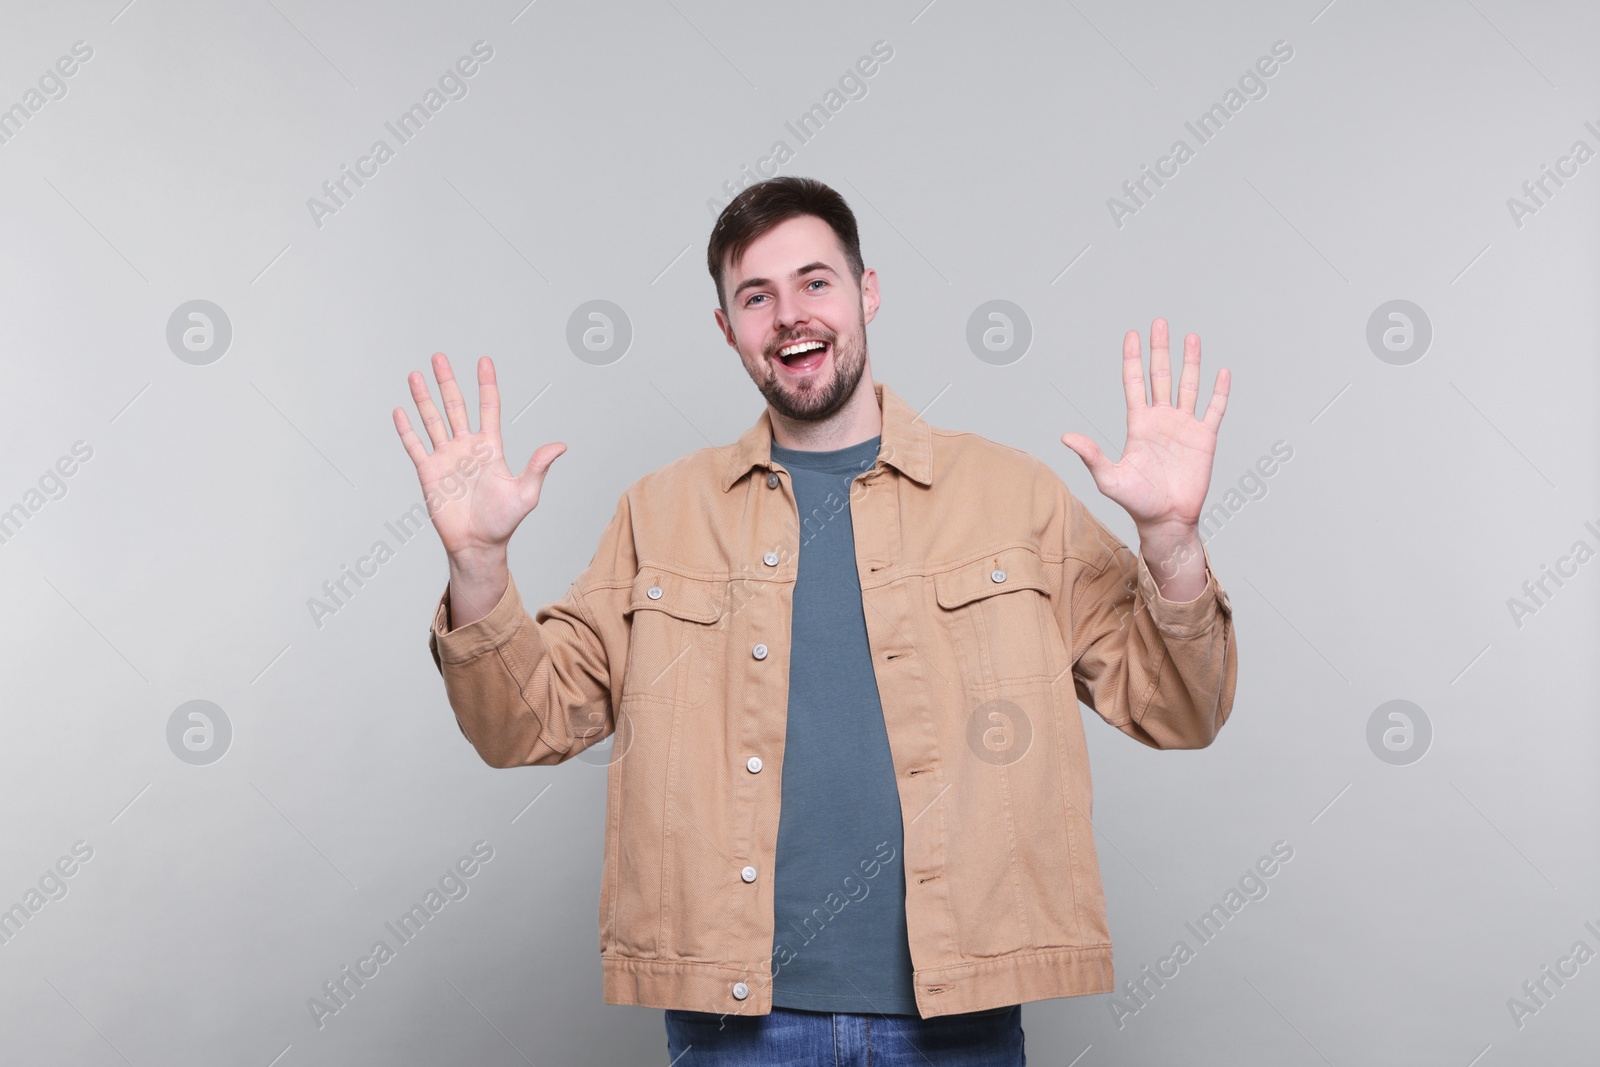 Photo of Man giving high five with both hands on grey background